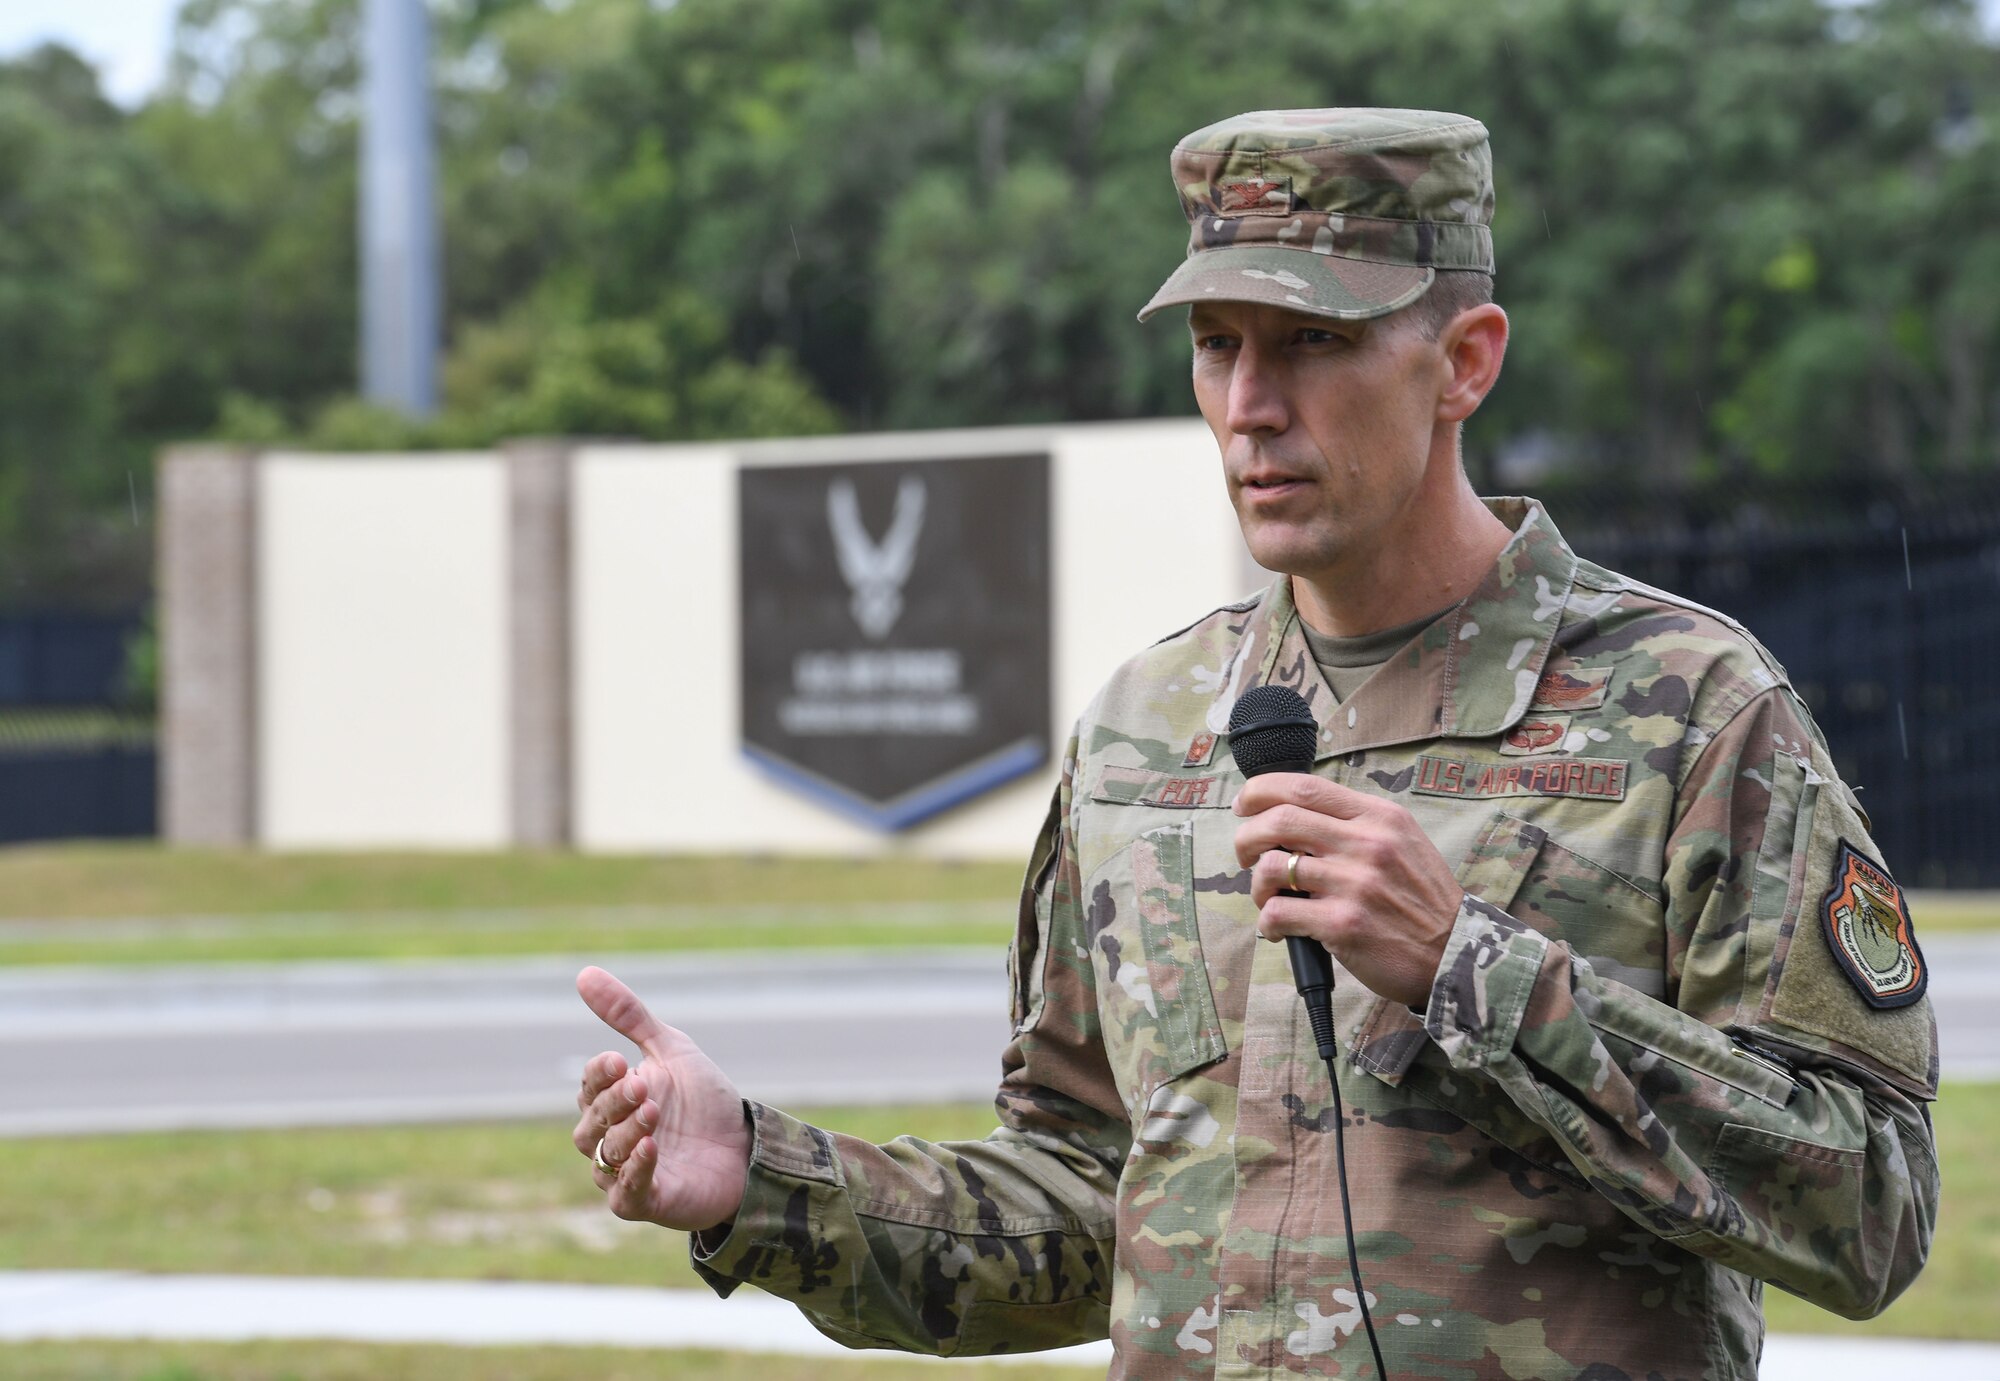 U.S. Air Force Col. Billy Pope, 81st Training Wing commander, delivers remarks during a tree planting ceremony near the Division Street Gate at Keesler Air Force Base, Mississippi, April 24, 2023.